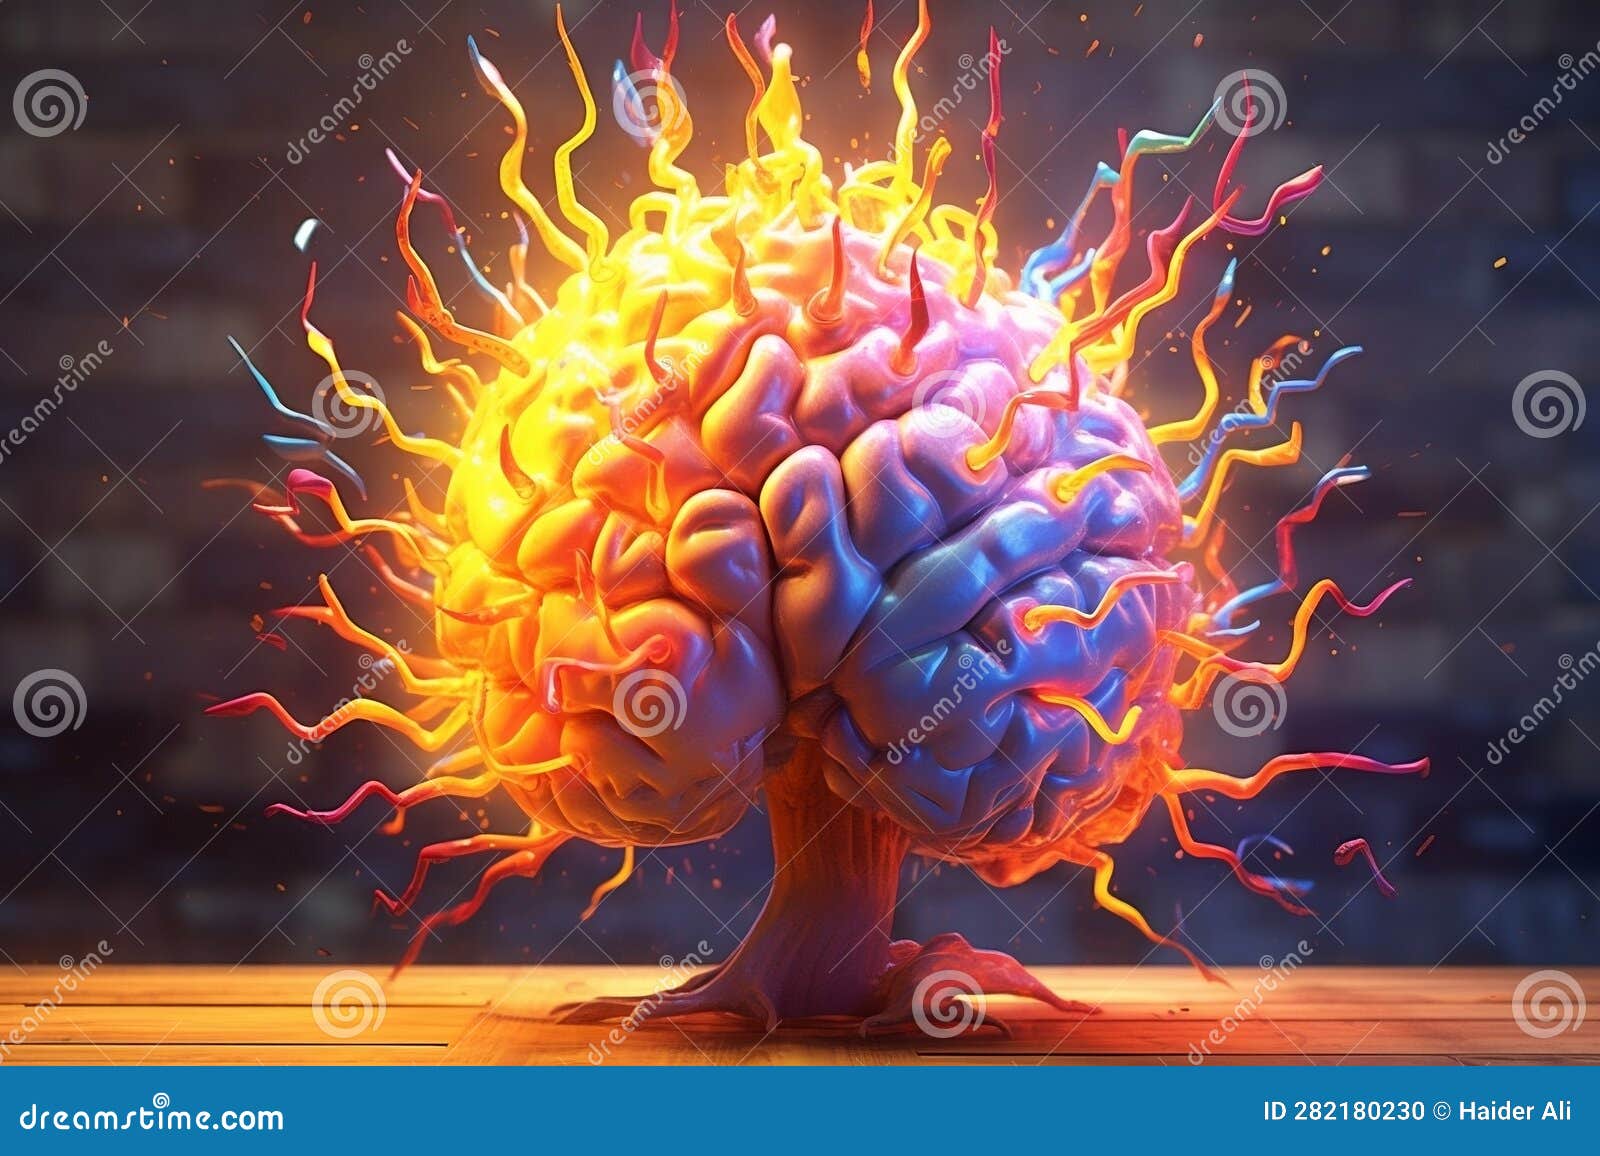 Abstract Representation of a Human Brain Bursting with Creative Energy